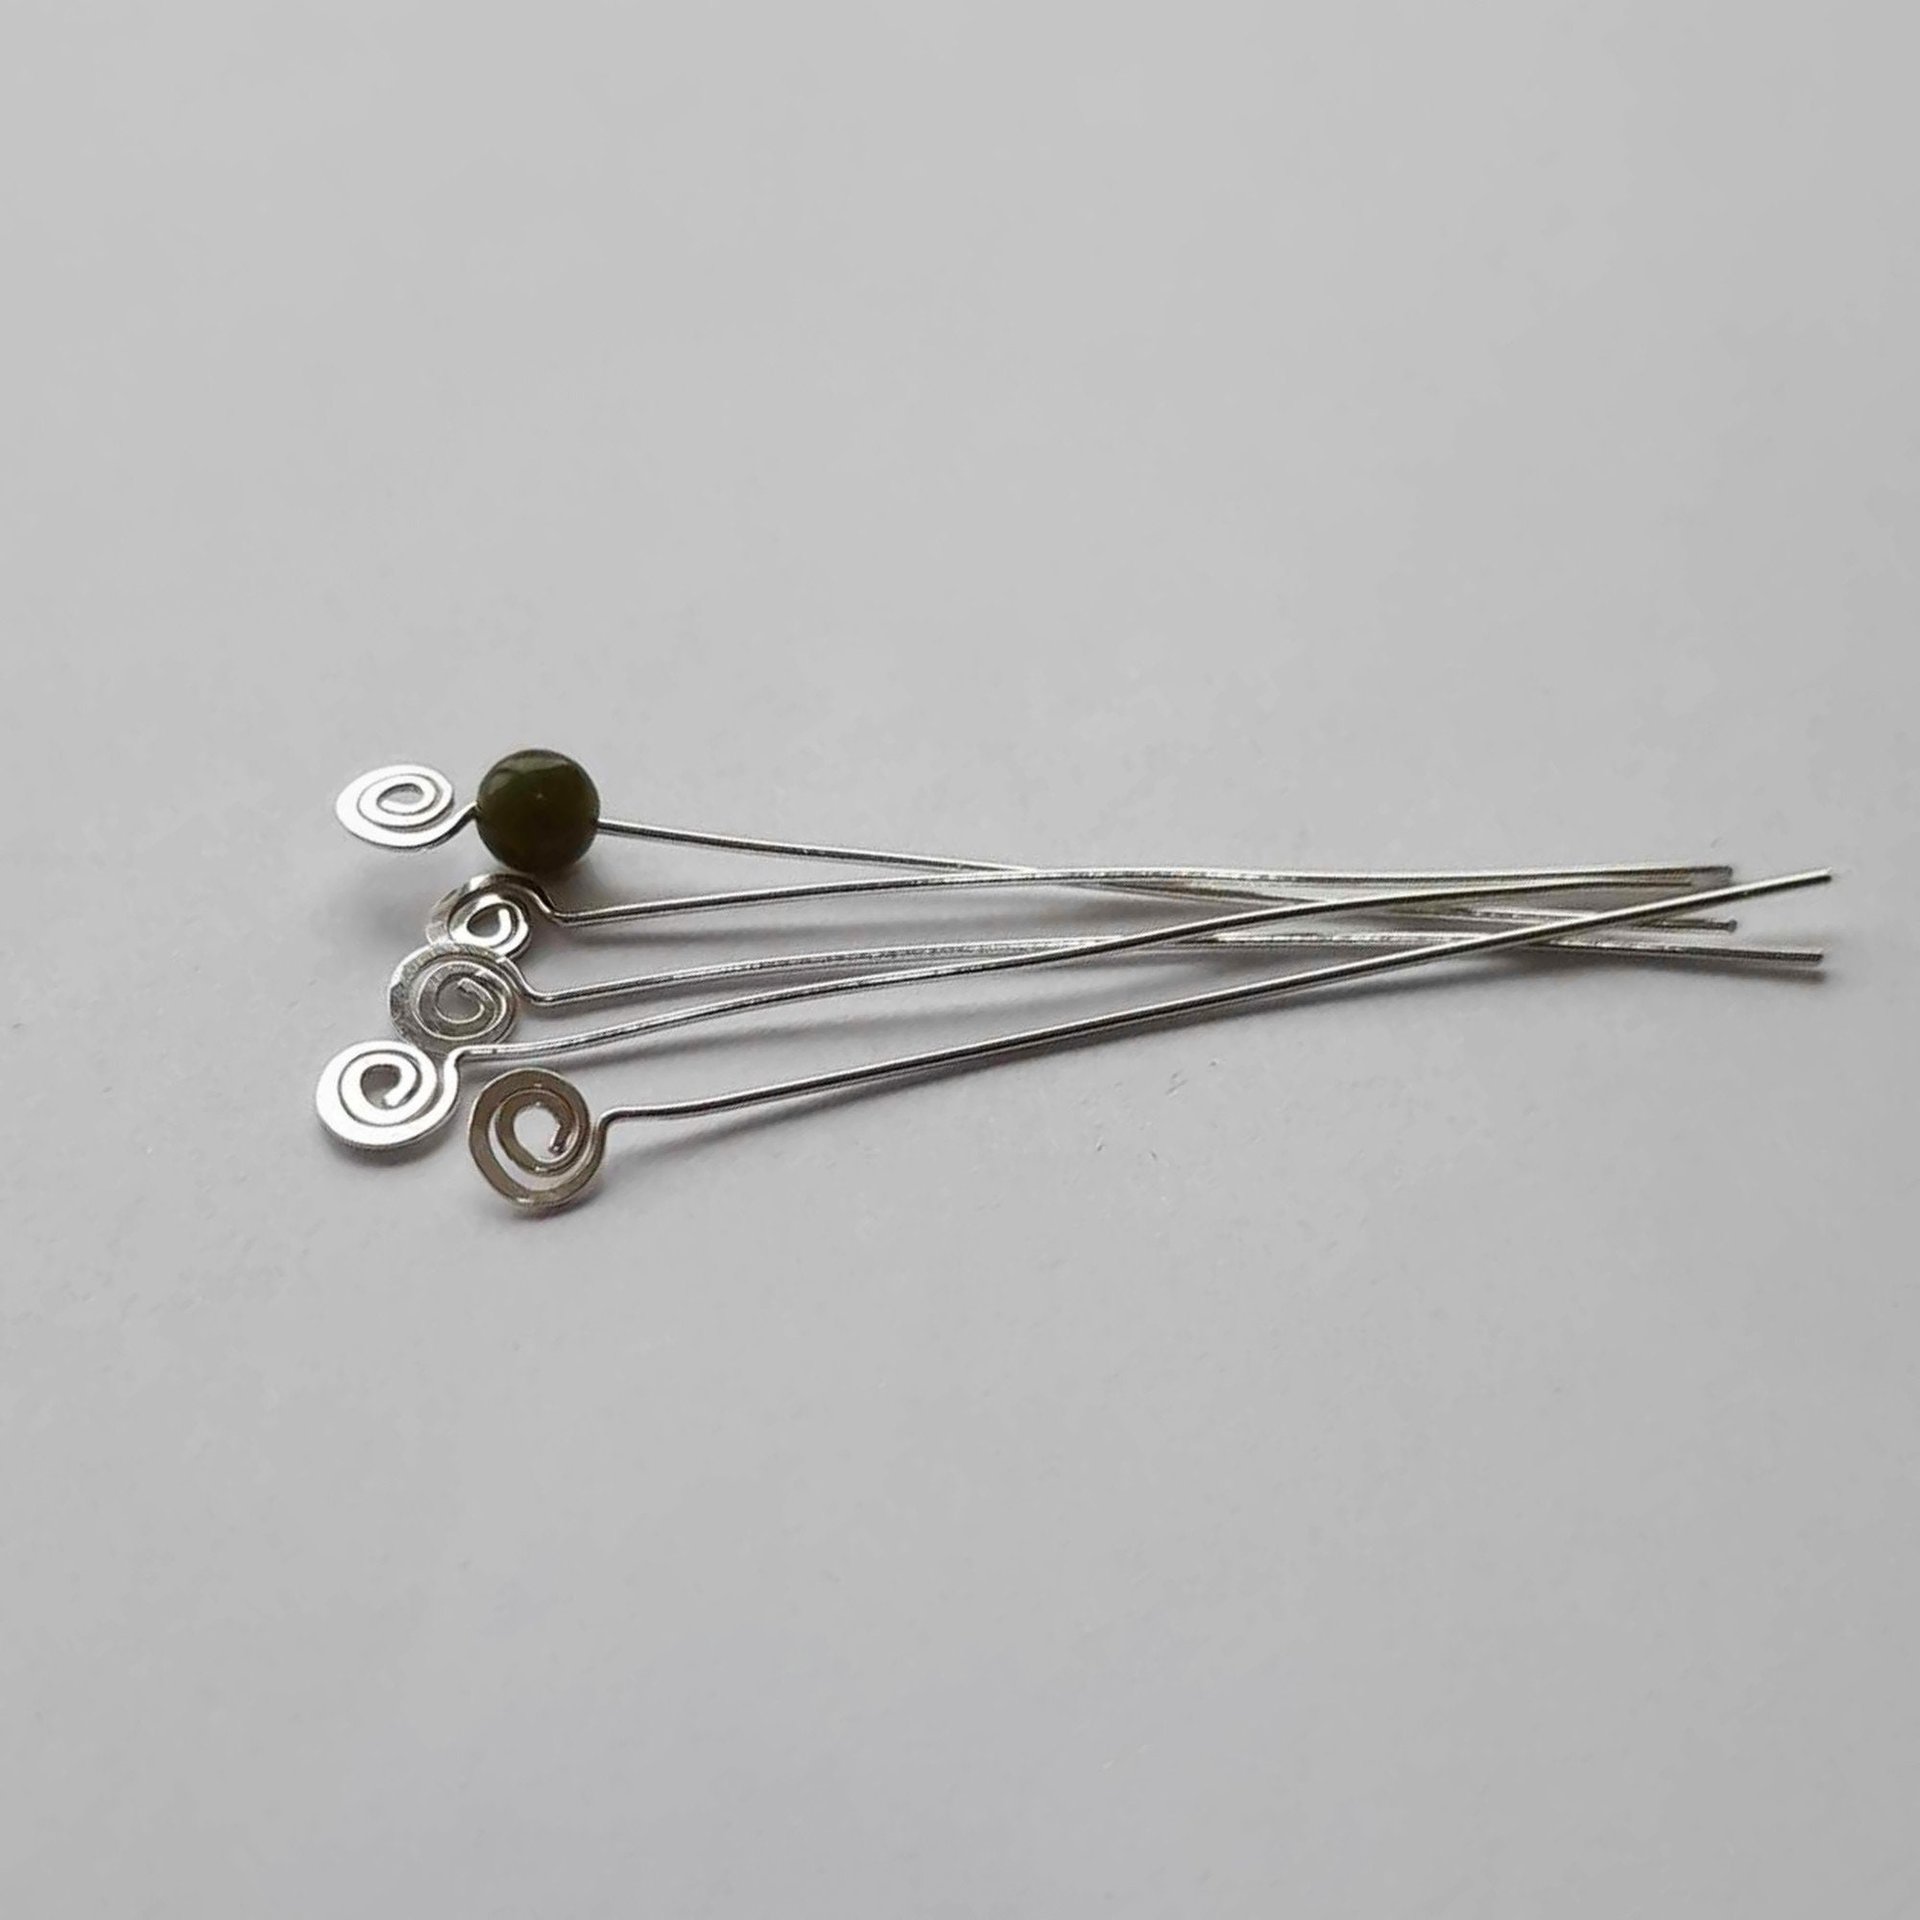 Recycled Sterling Silver Spiral End Headpins ~ Handmade by The Tiny Tree Frog Jewellery